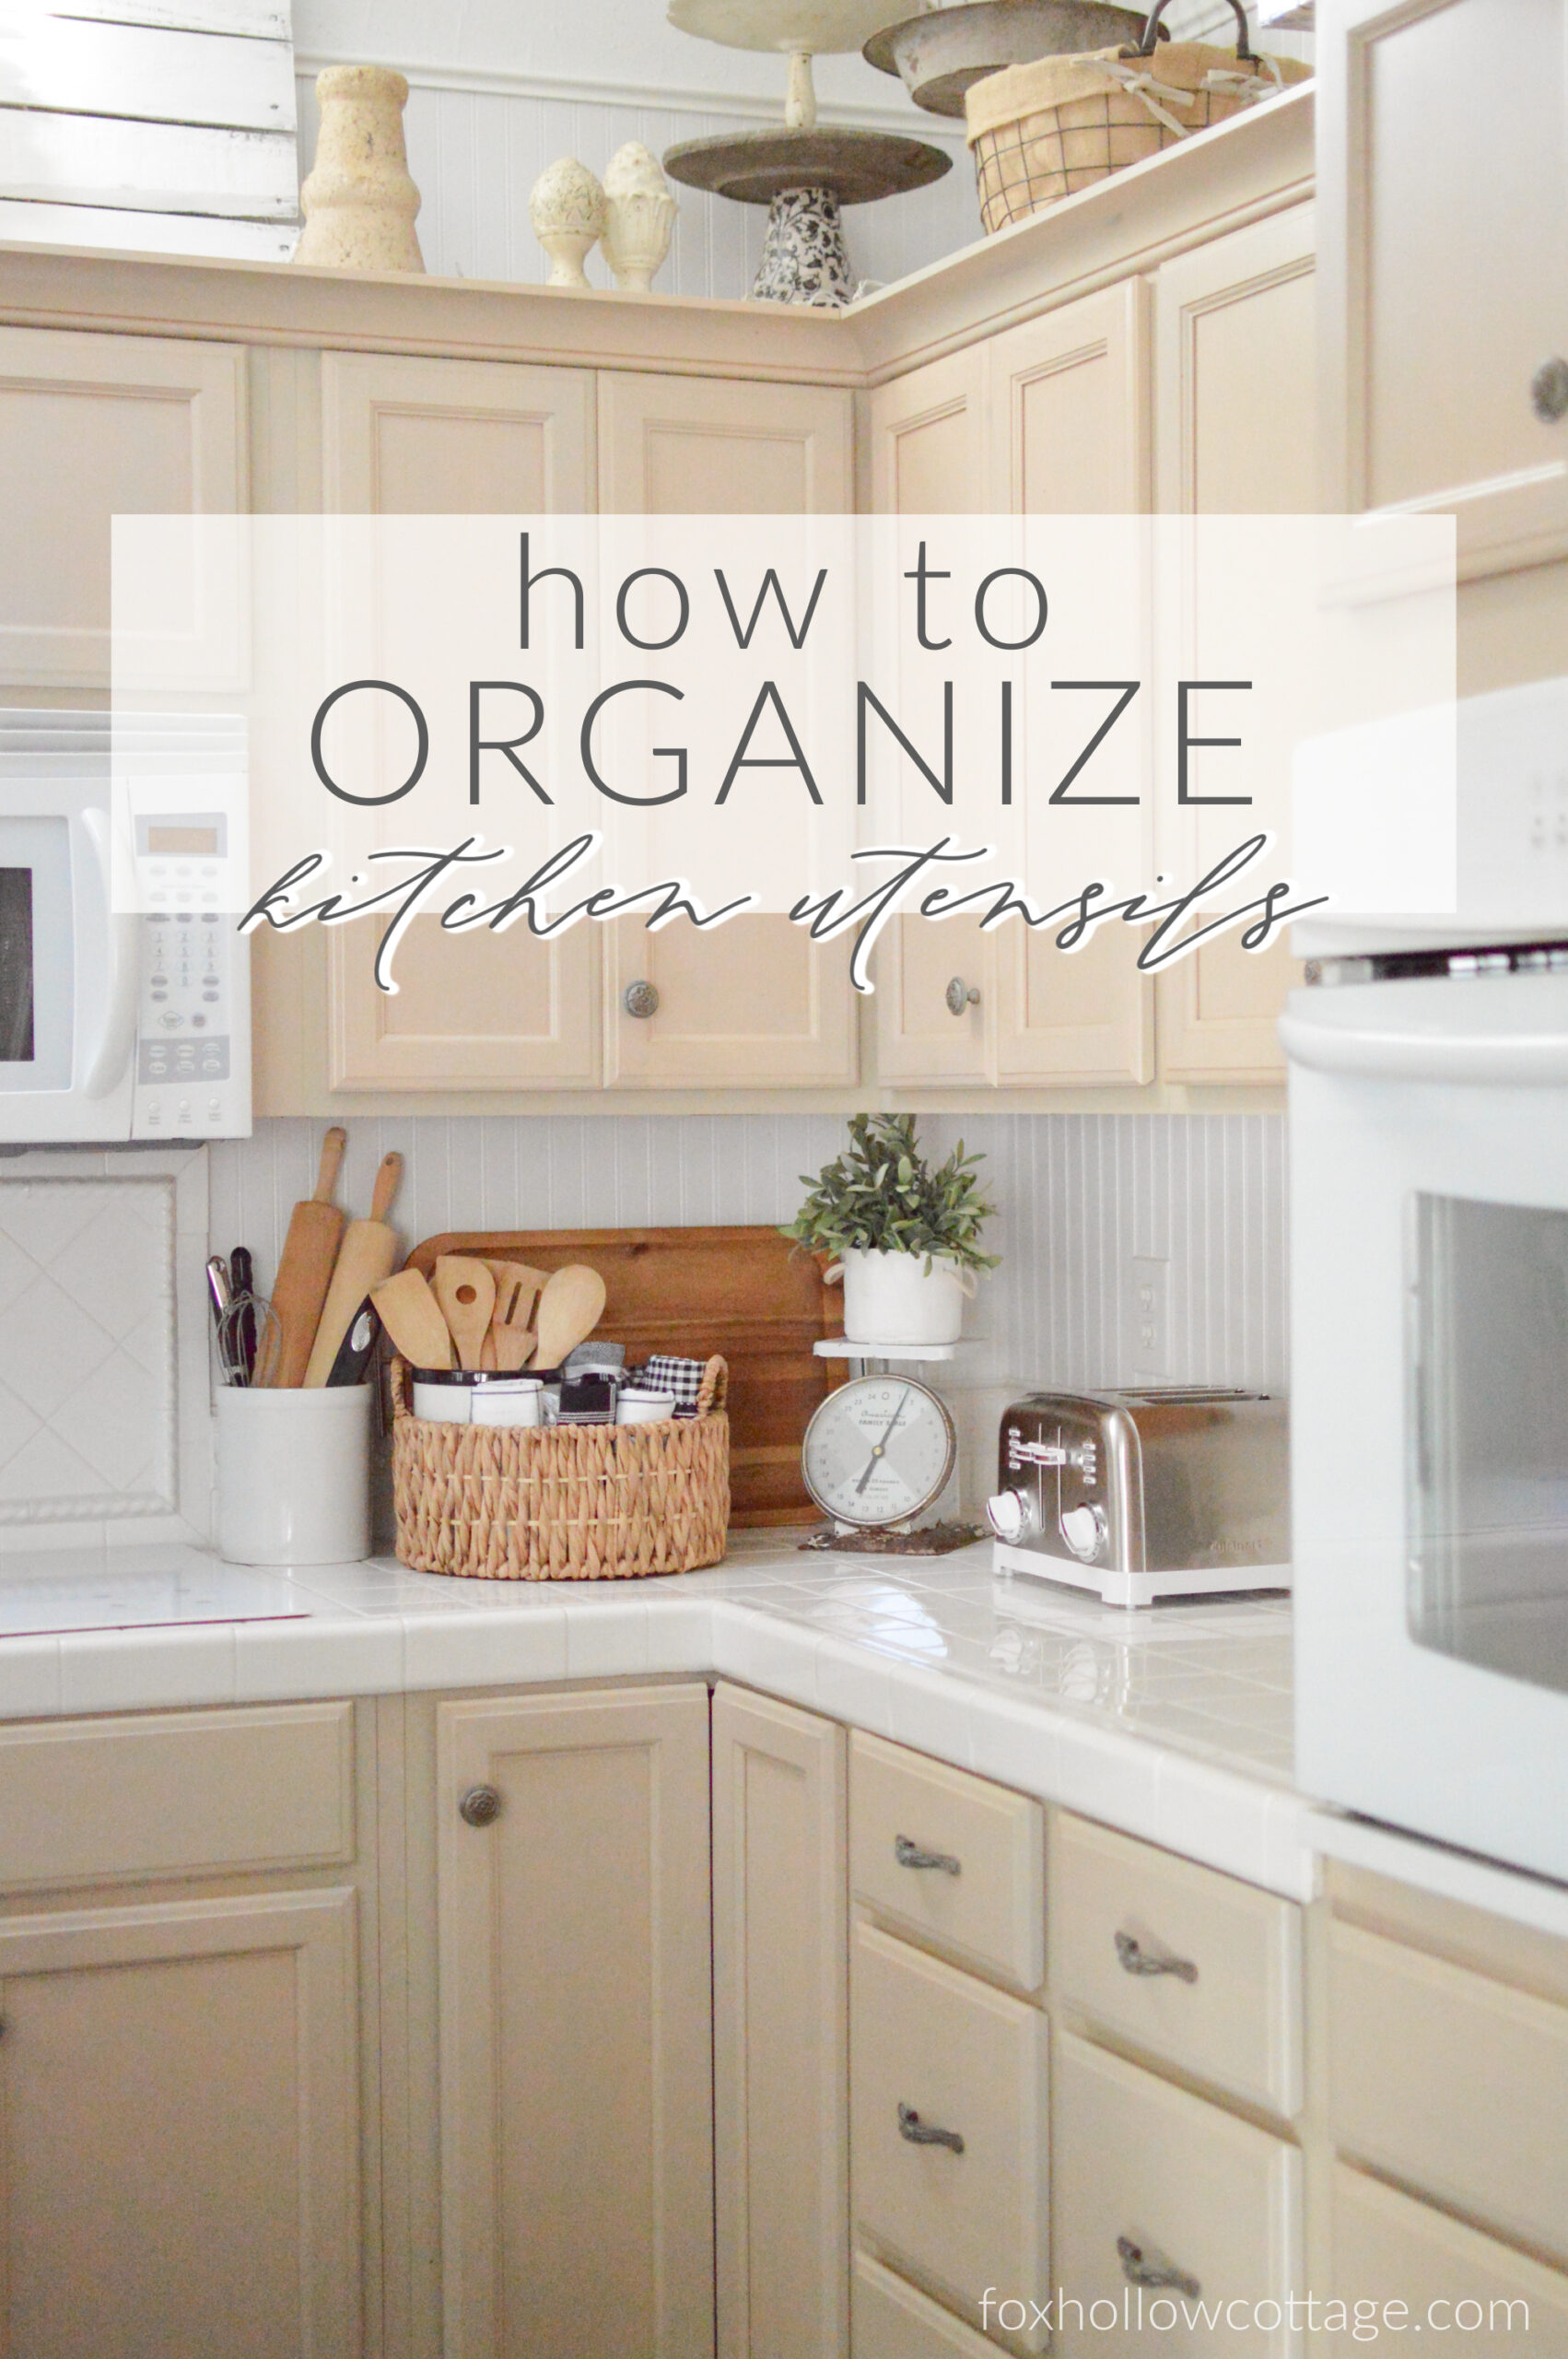 https://foxhollowcottage.com/wp-content/uploads/2021/01/Organized-Utensil-Storage-Ideas-Weekly-Cleaning-Organizing-event-with-Free-Printable-checklist-www.foxhollowcottage.com-Organizing-Utensils-scaled.jpg